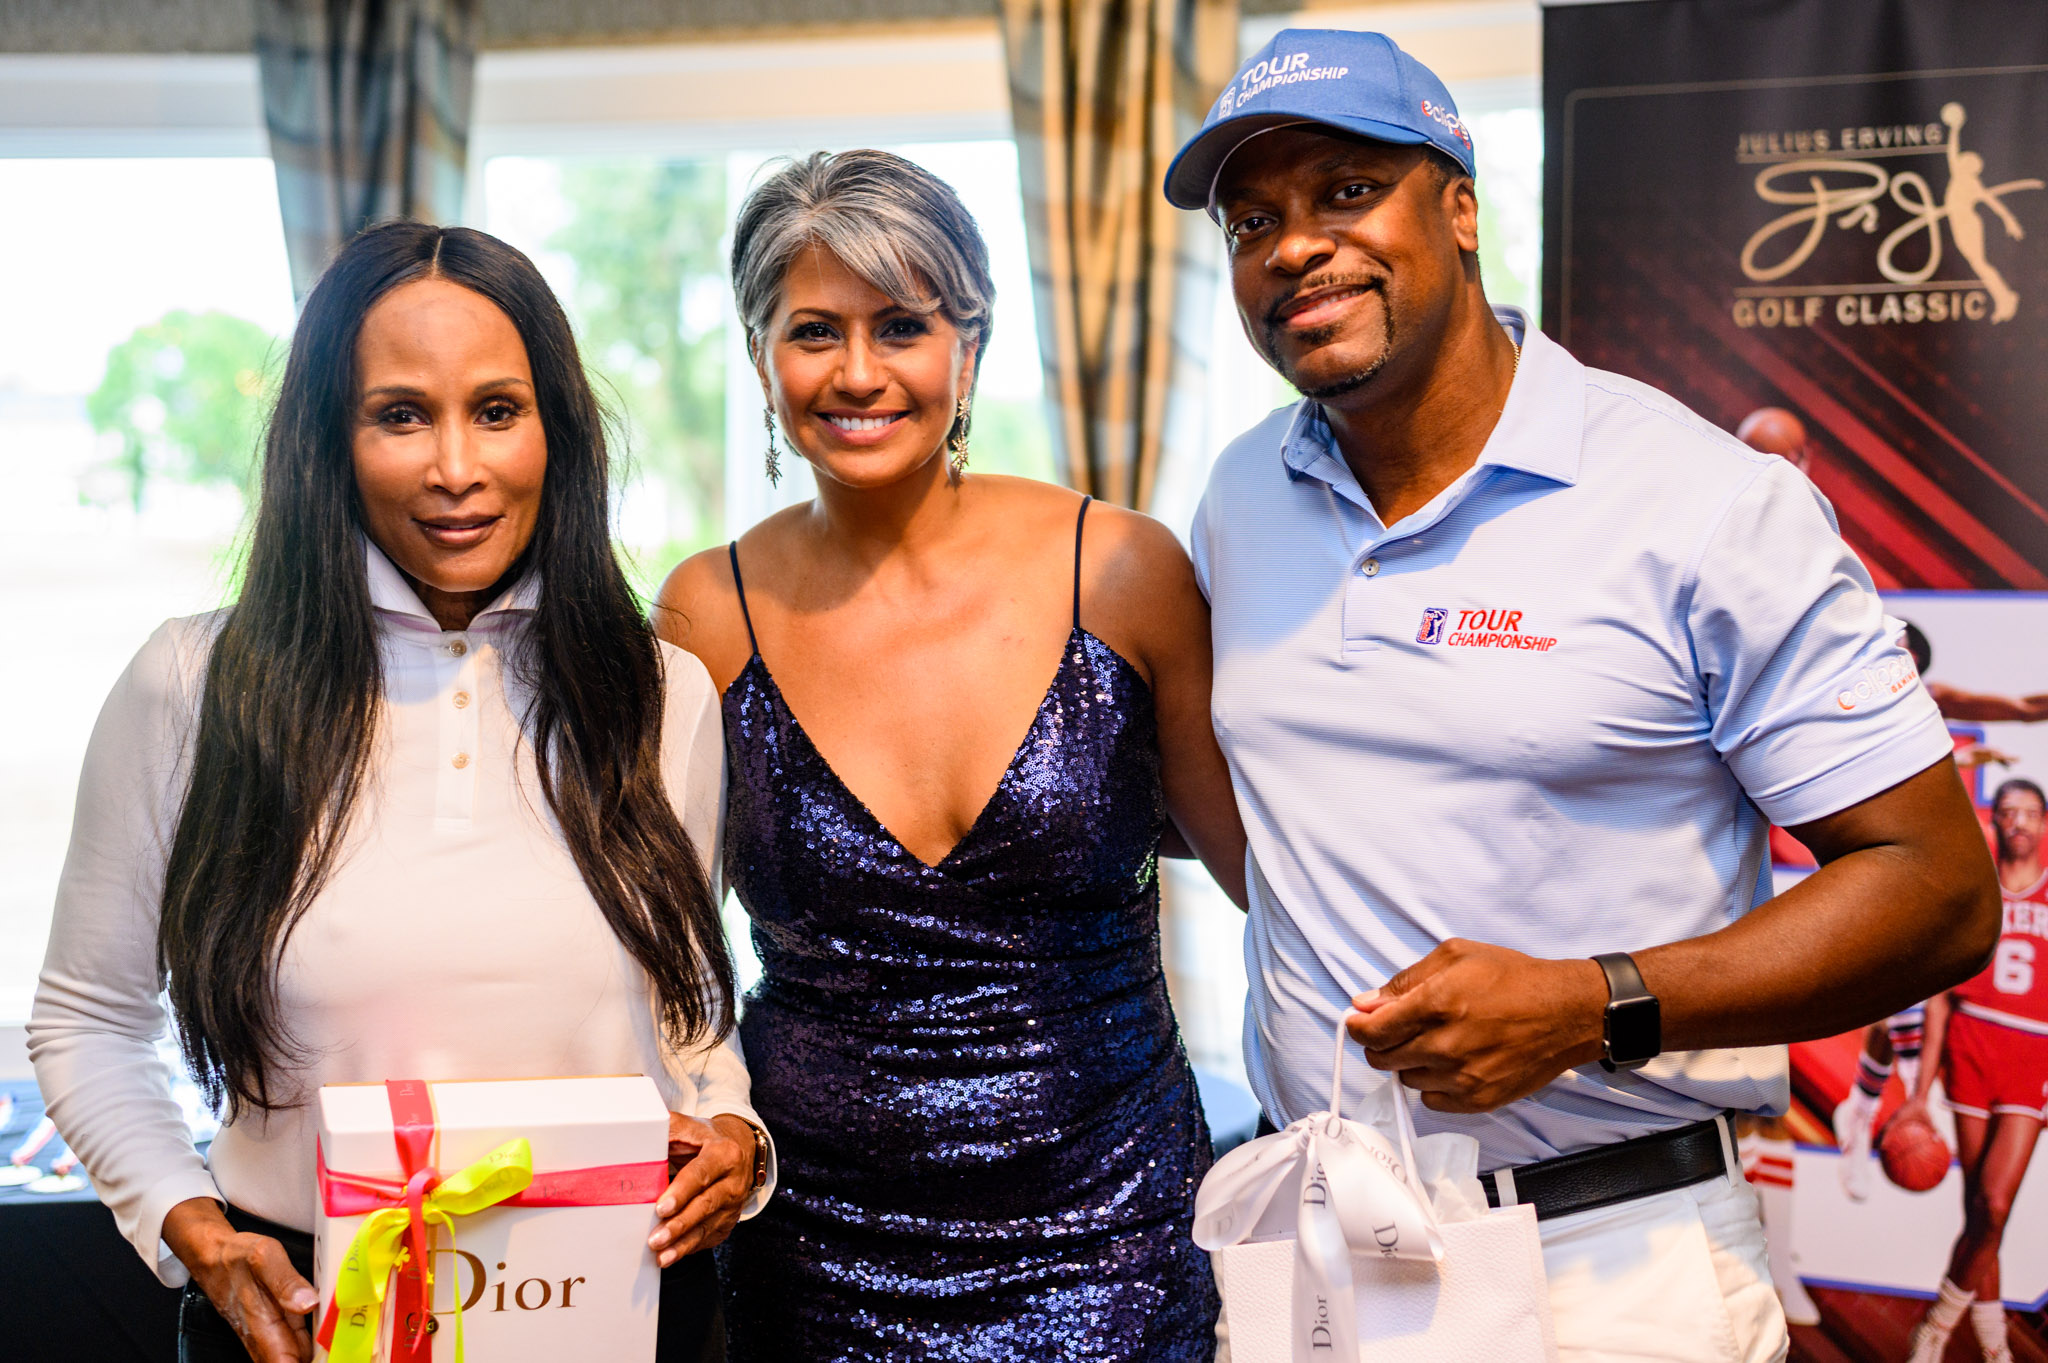 Supermodel Beverly Johnson (L), Glori Amador, Dior Beauty (C) and Actor & Comedian Chris Tucker (R) accept their best dressed awards at the 5th Anniversary of The Julius Erving Golf Classic